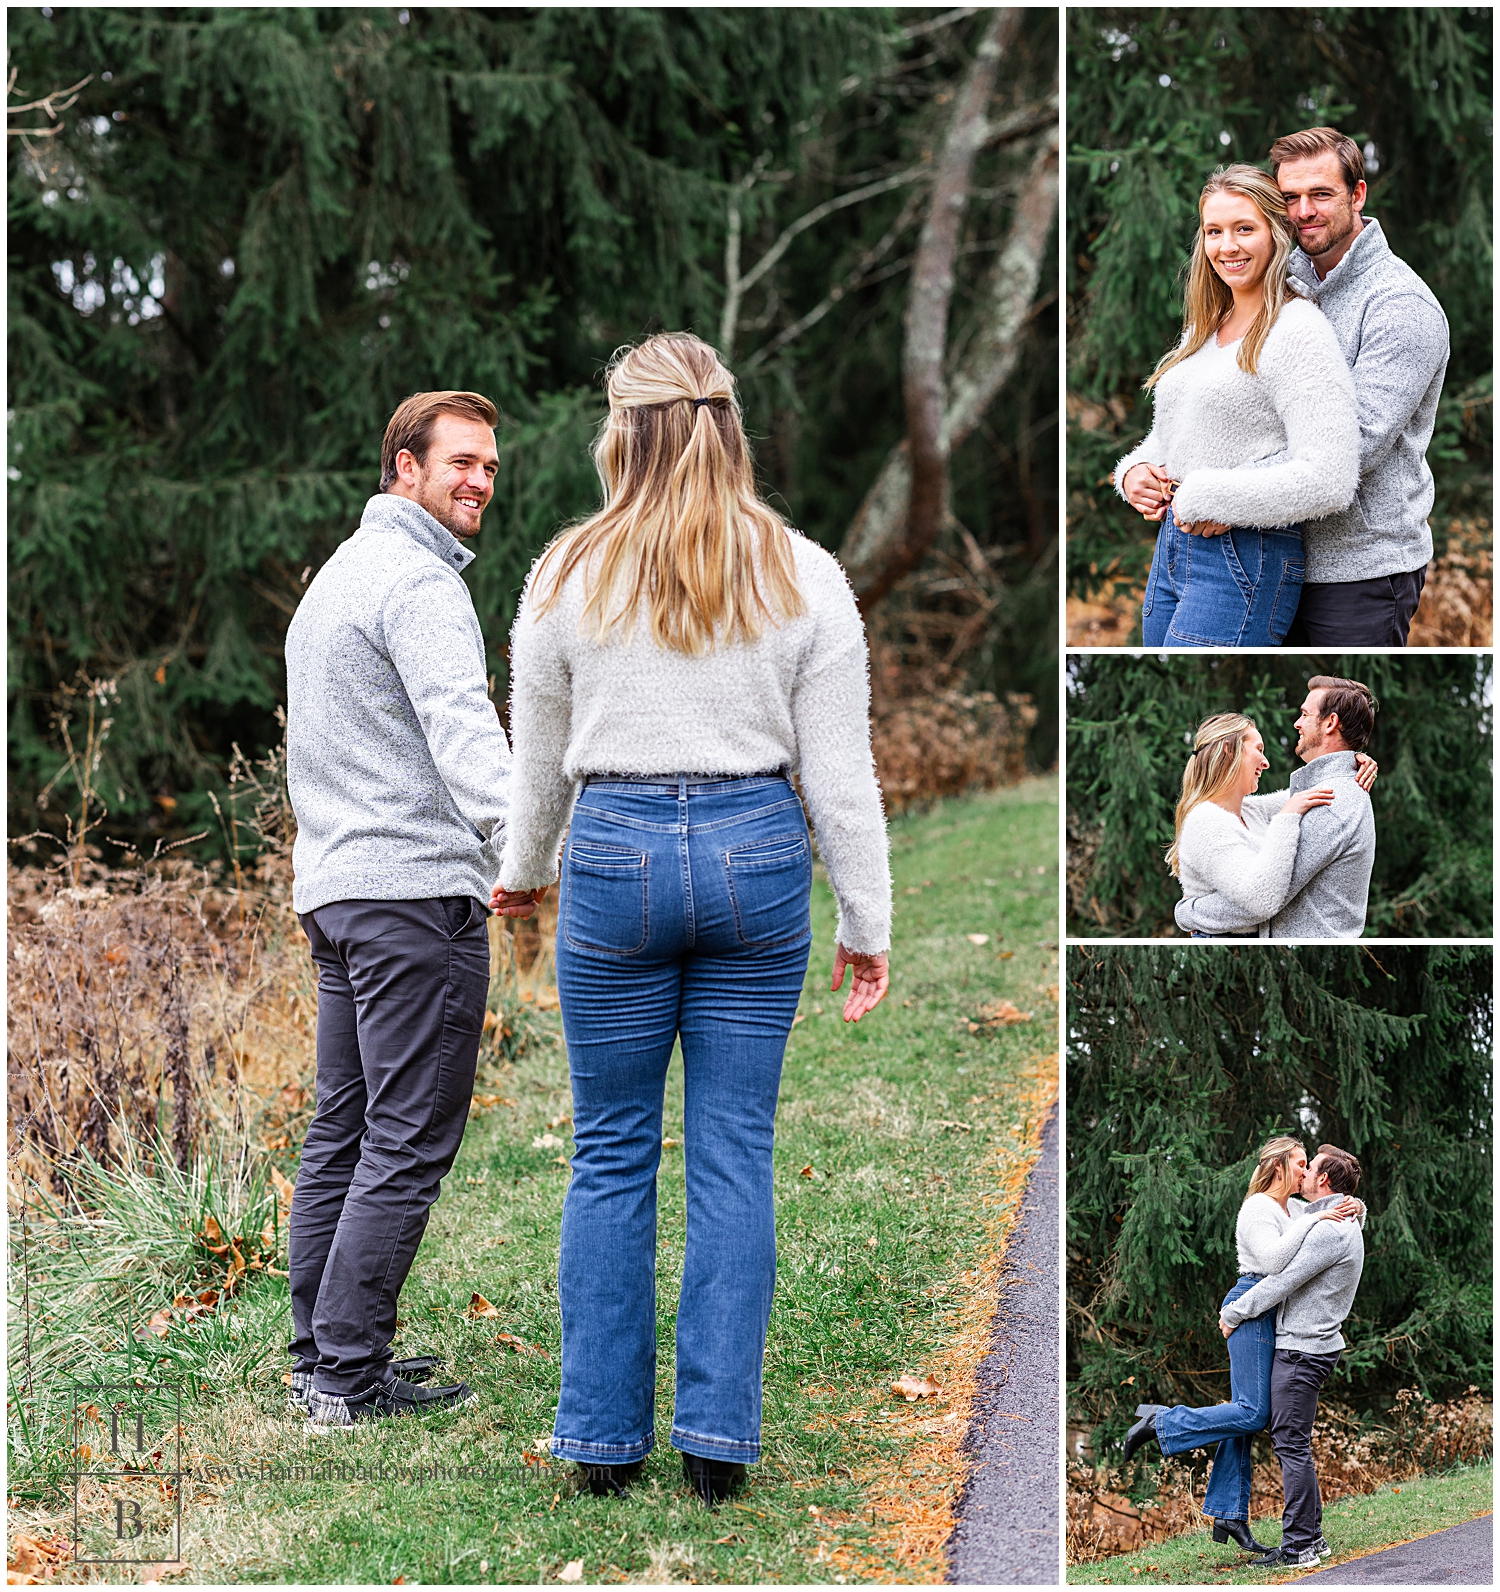 Man walks with woman by pine trees for engagement photos